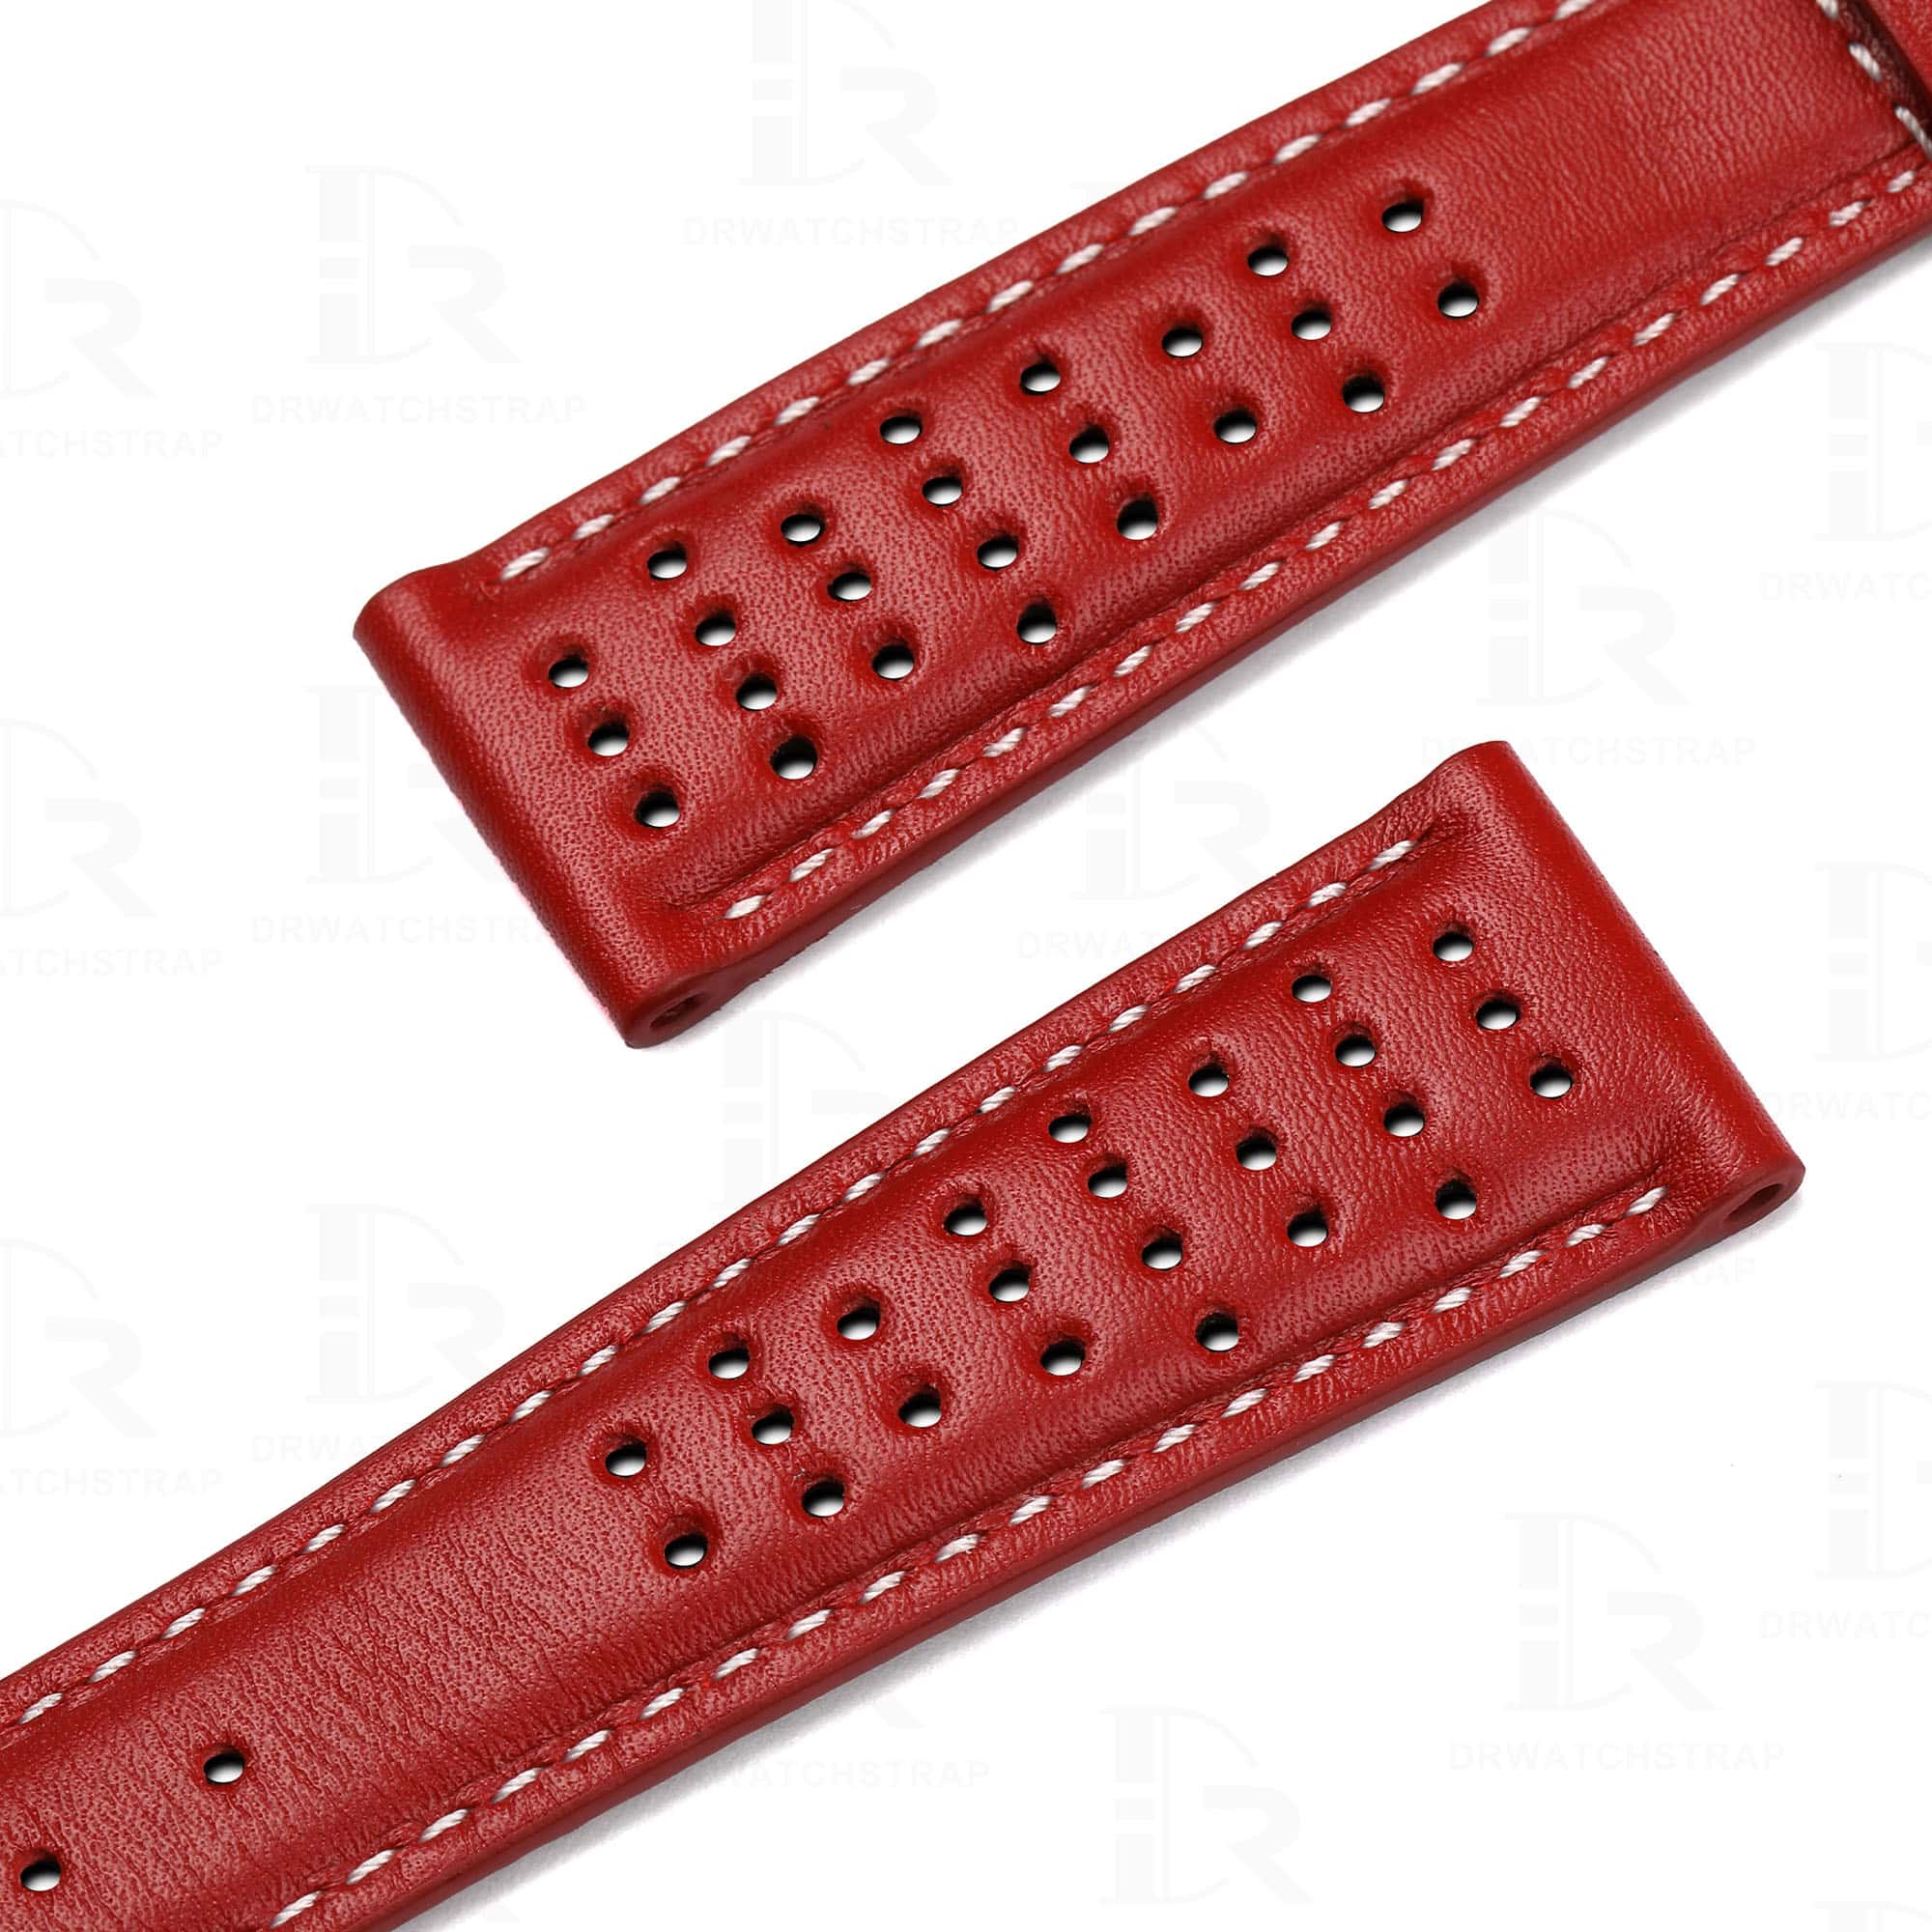 Custom calfskin rally Micro-perforated red leather watch straps replacement 19mm 20mm for Omega Speedmaster Seamaster watch